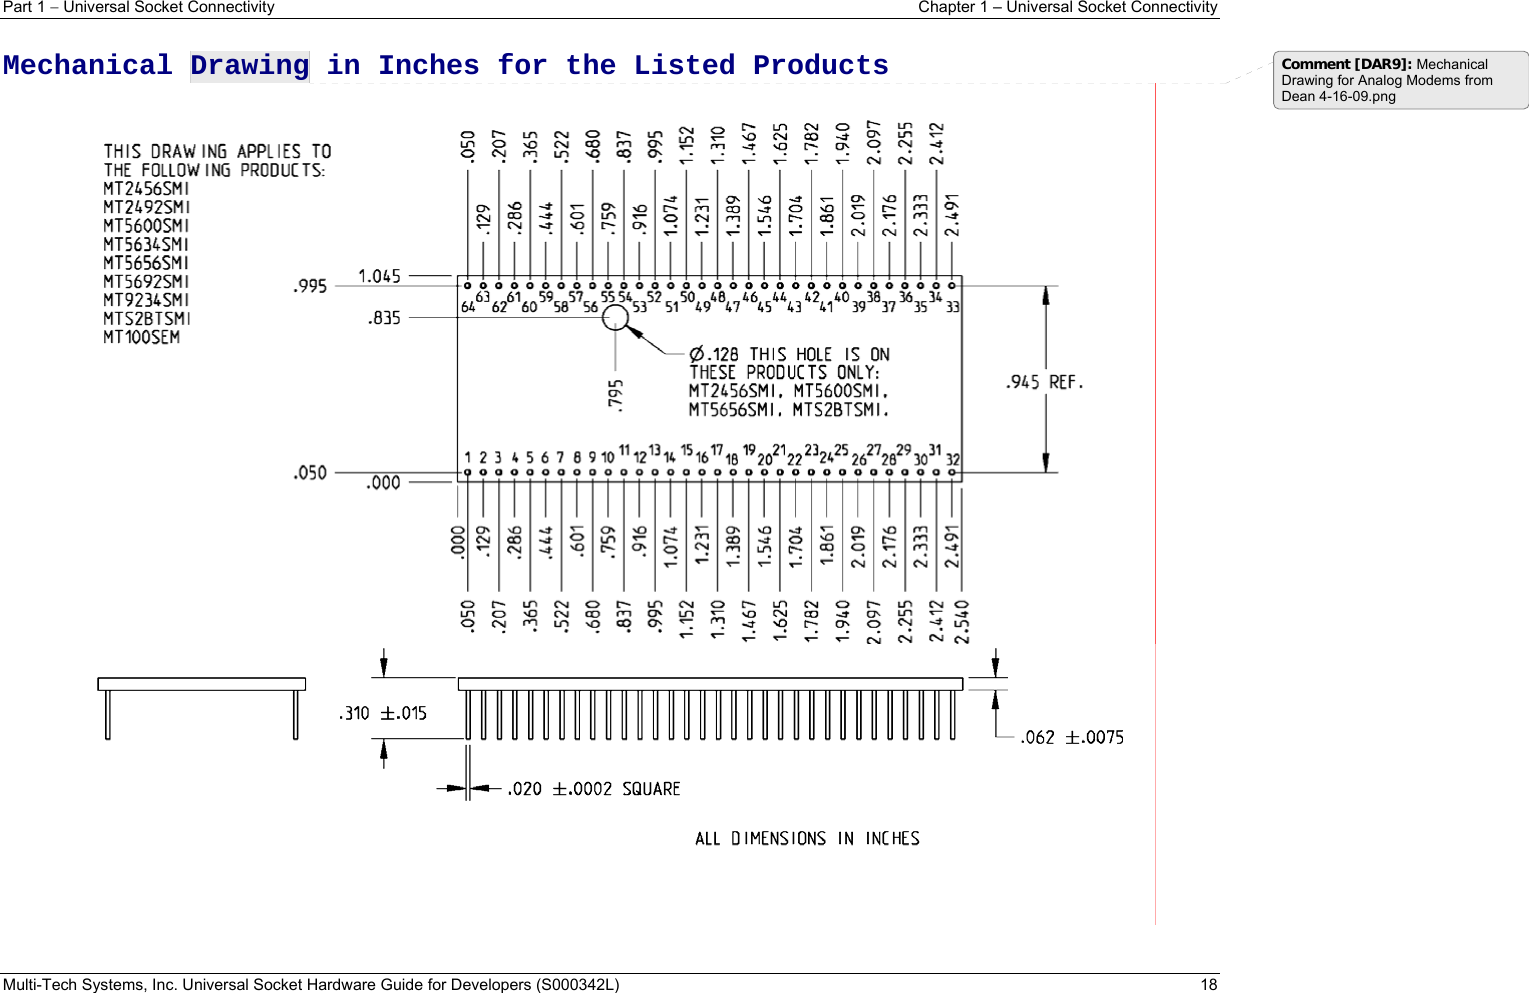 Part 1  Universal Socket Connectivity  Chapter 1 – Universal Socket Connectivity Multi-Tech Systems, Inc. Universal Socket Hardware Guide for Developers (S000342L)  18  Mechanical Drawing in Inches for the Listed Products  Comment [DAR9]: Mechanical Drawing for Analog Modems from Dean 4-16-09.png 